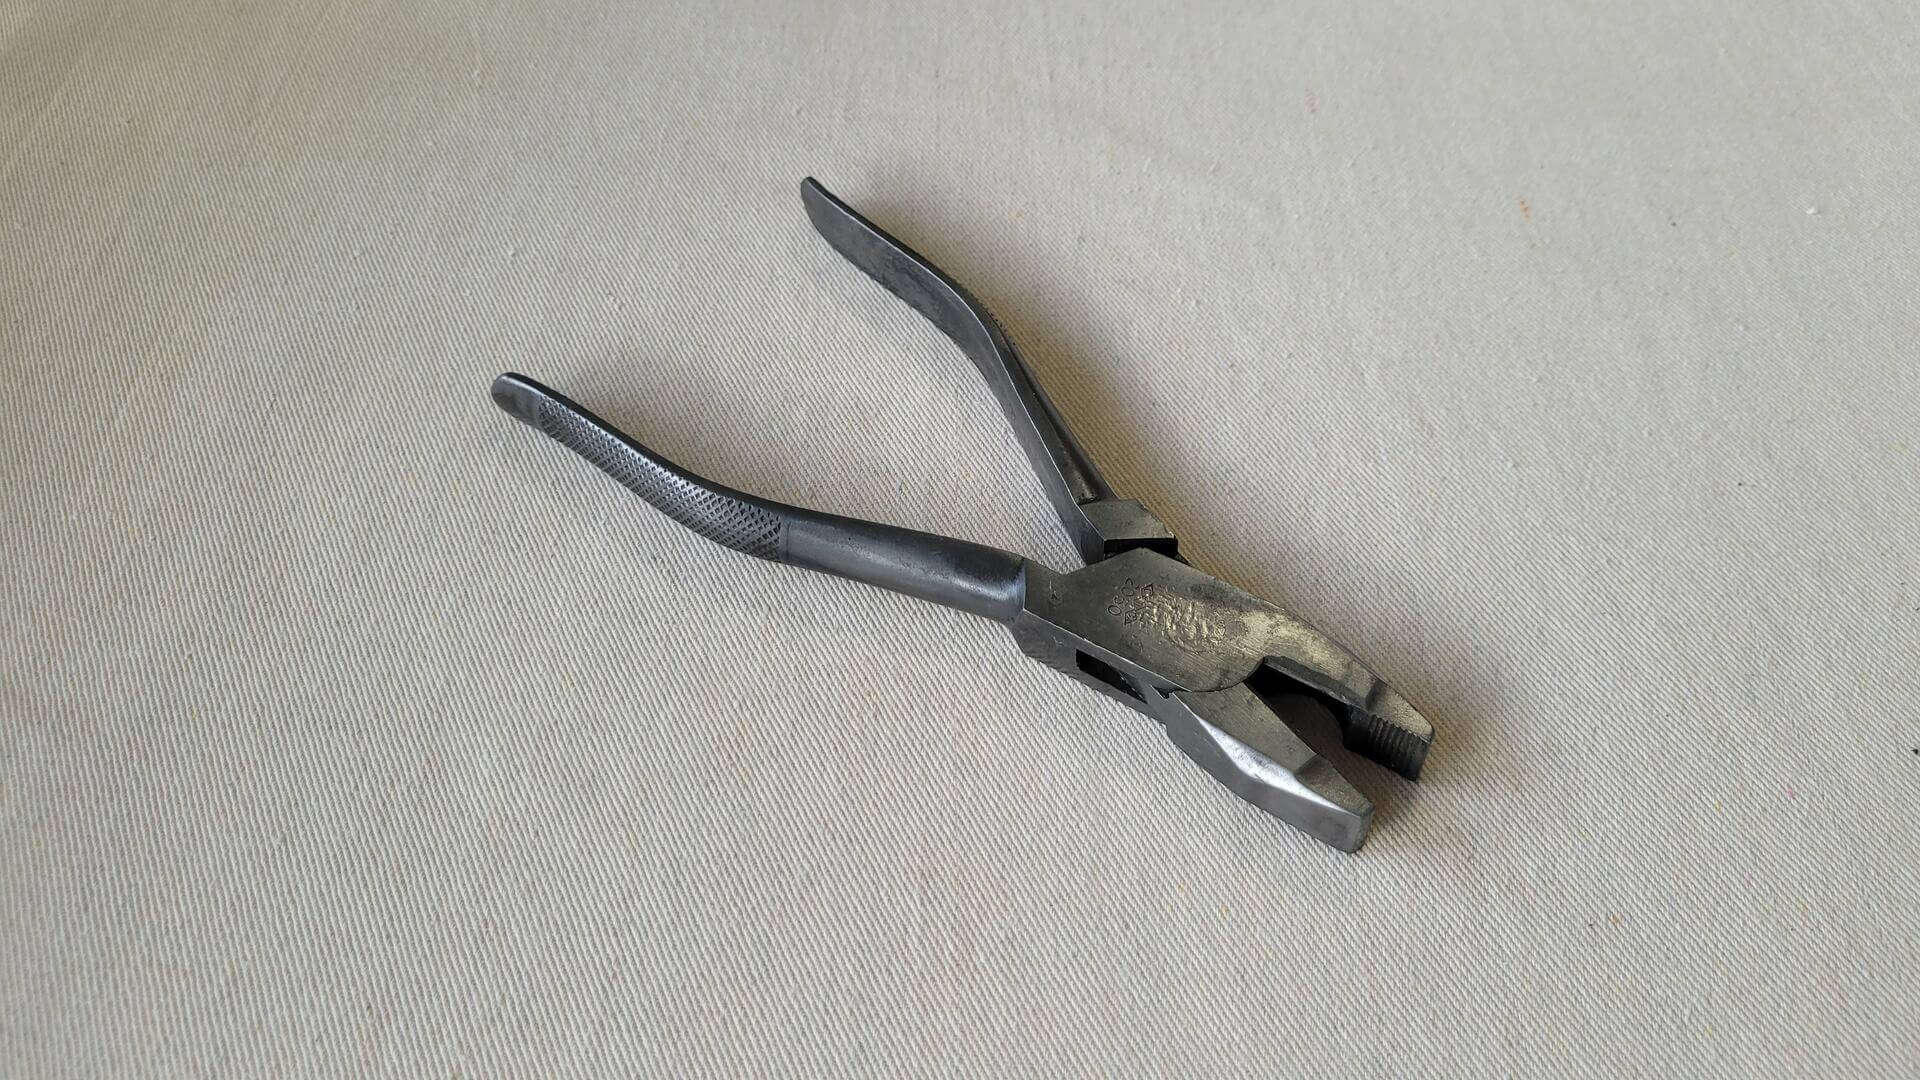 utica-tools-no-2050-box-joint-lineman-pliers-w-side-cutters-antique-vintage-made-in-usa-collectible-wrenches-drop-forge-tool